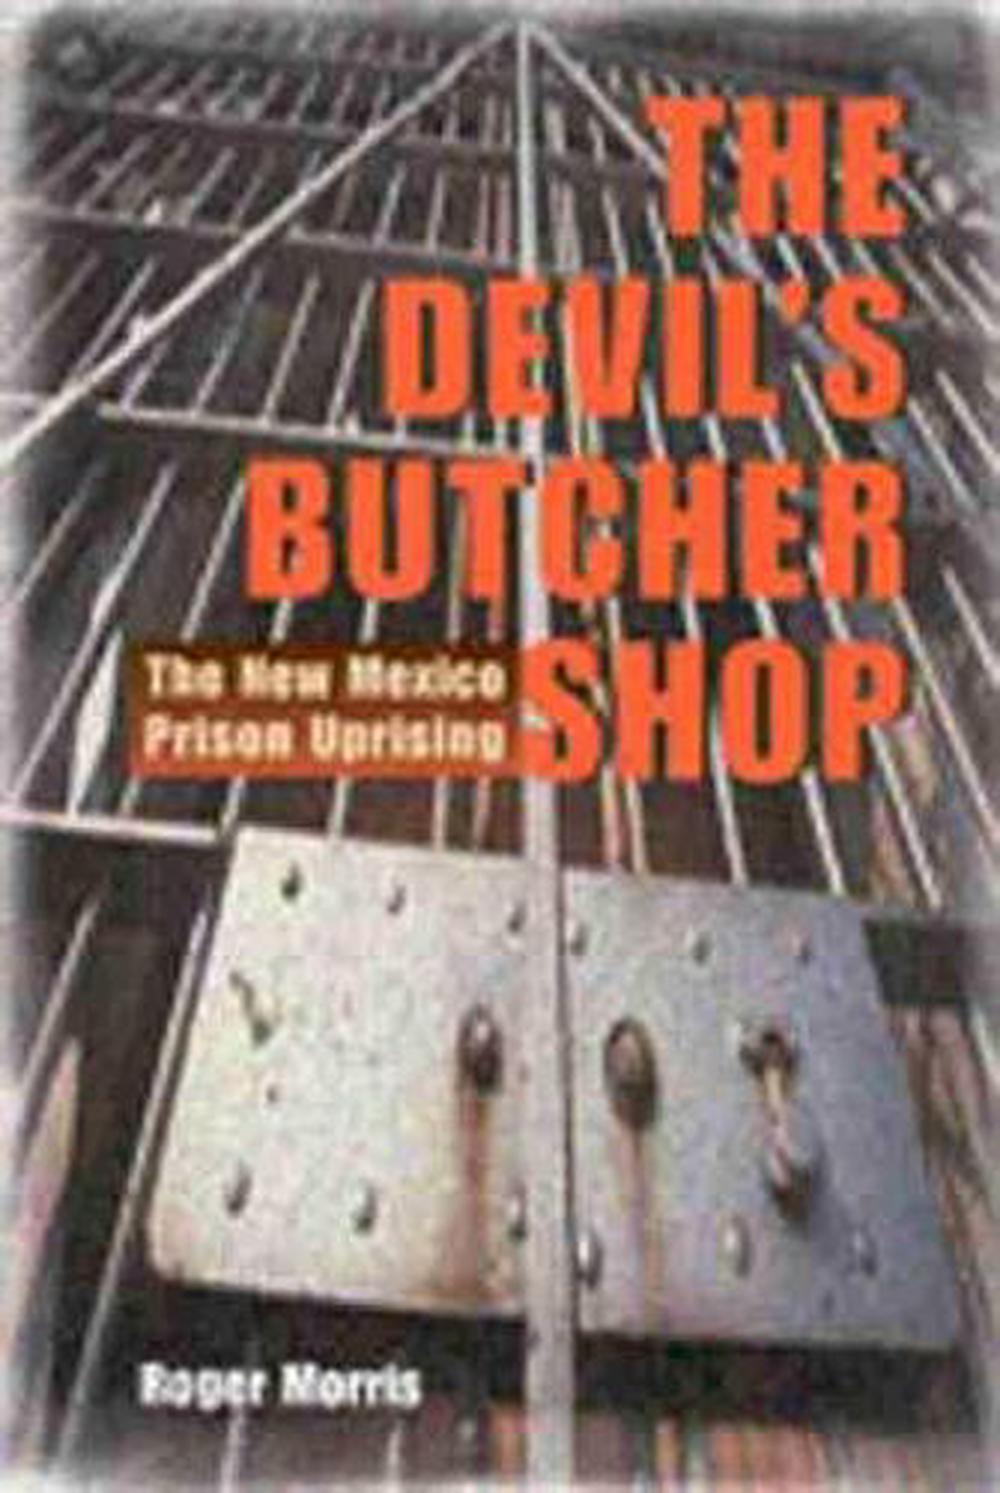 The Devil's Butcher Shop The New Mexico Prison Uprising by Roger